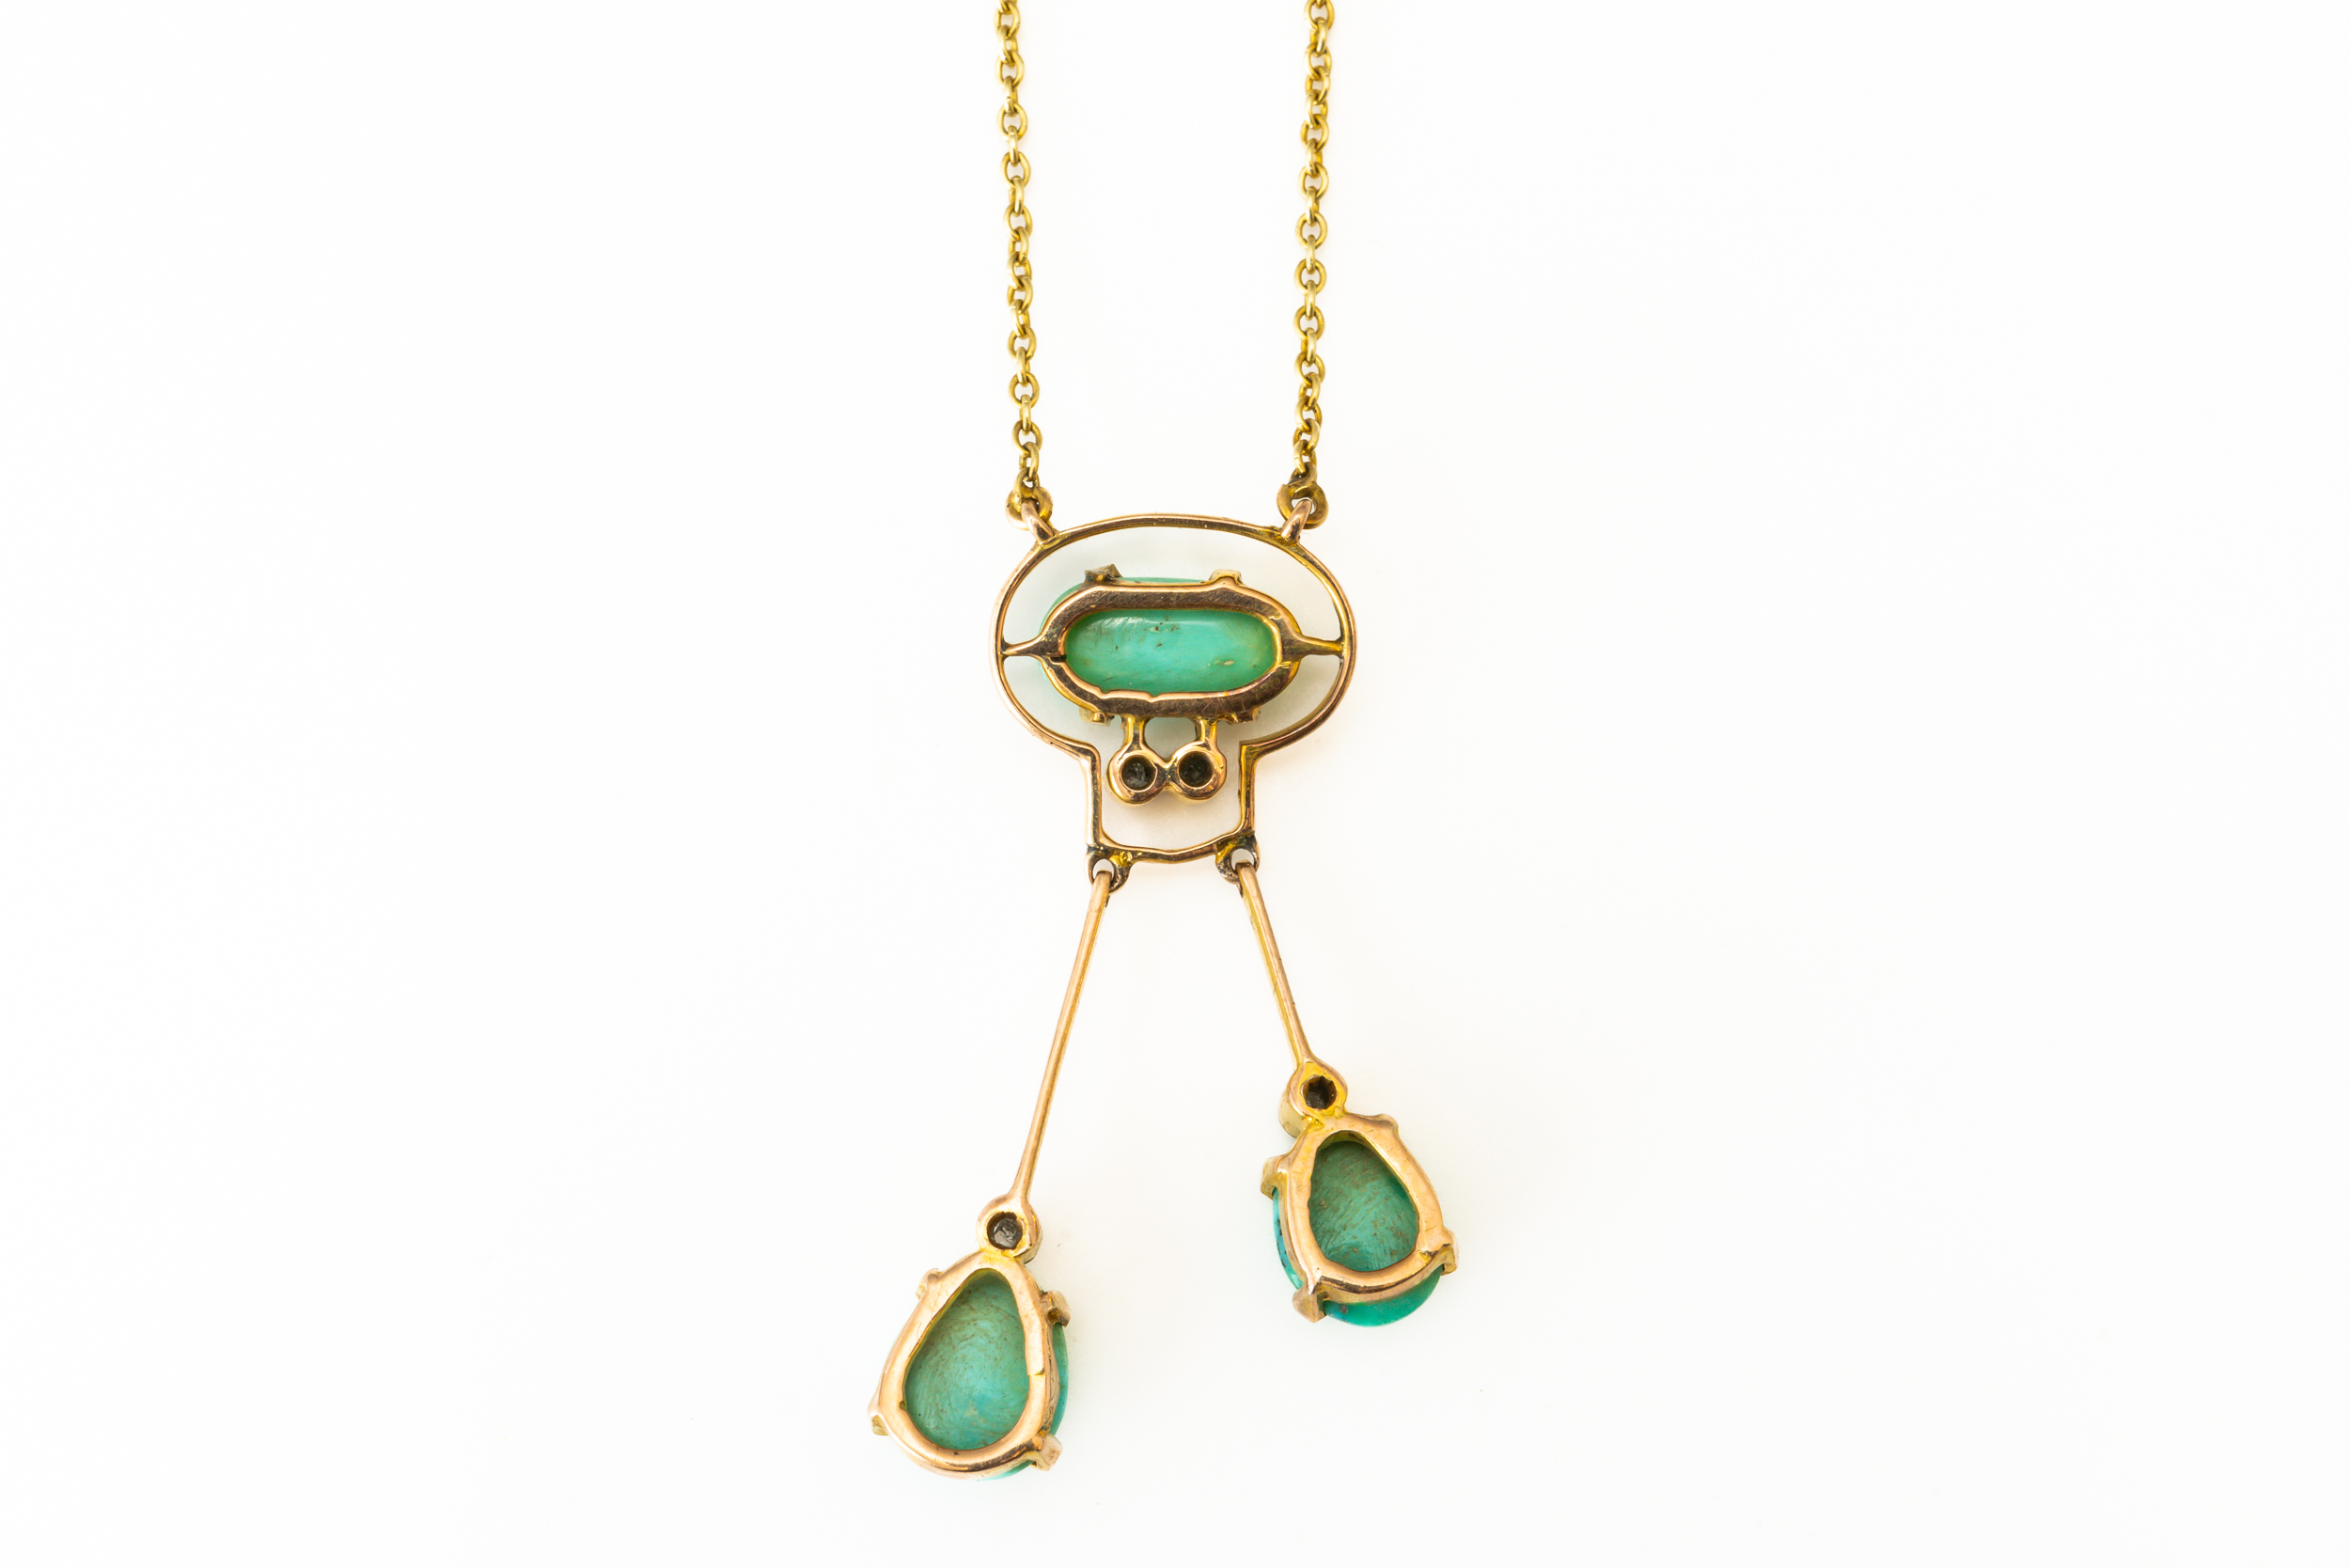 AN EDWARDIAN DIAMOND AND TURQUOISE NECKLACE - Image 3 of 4